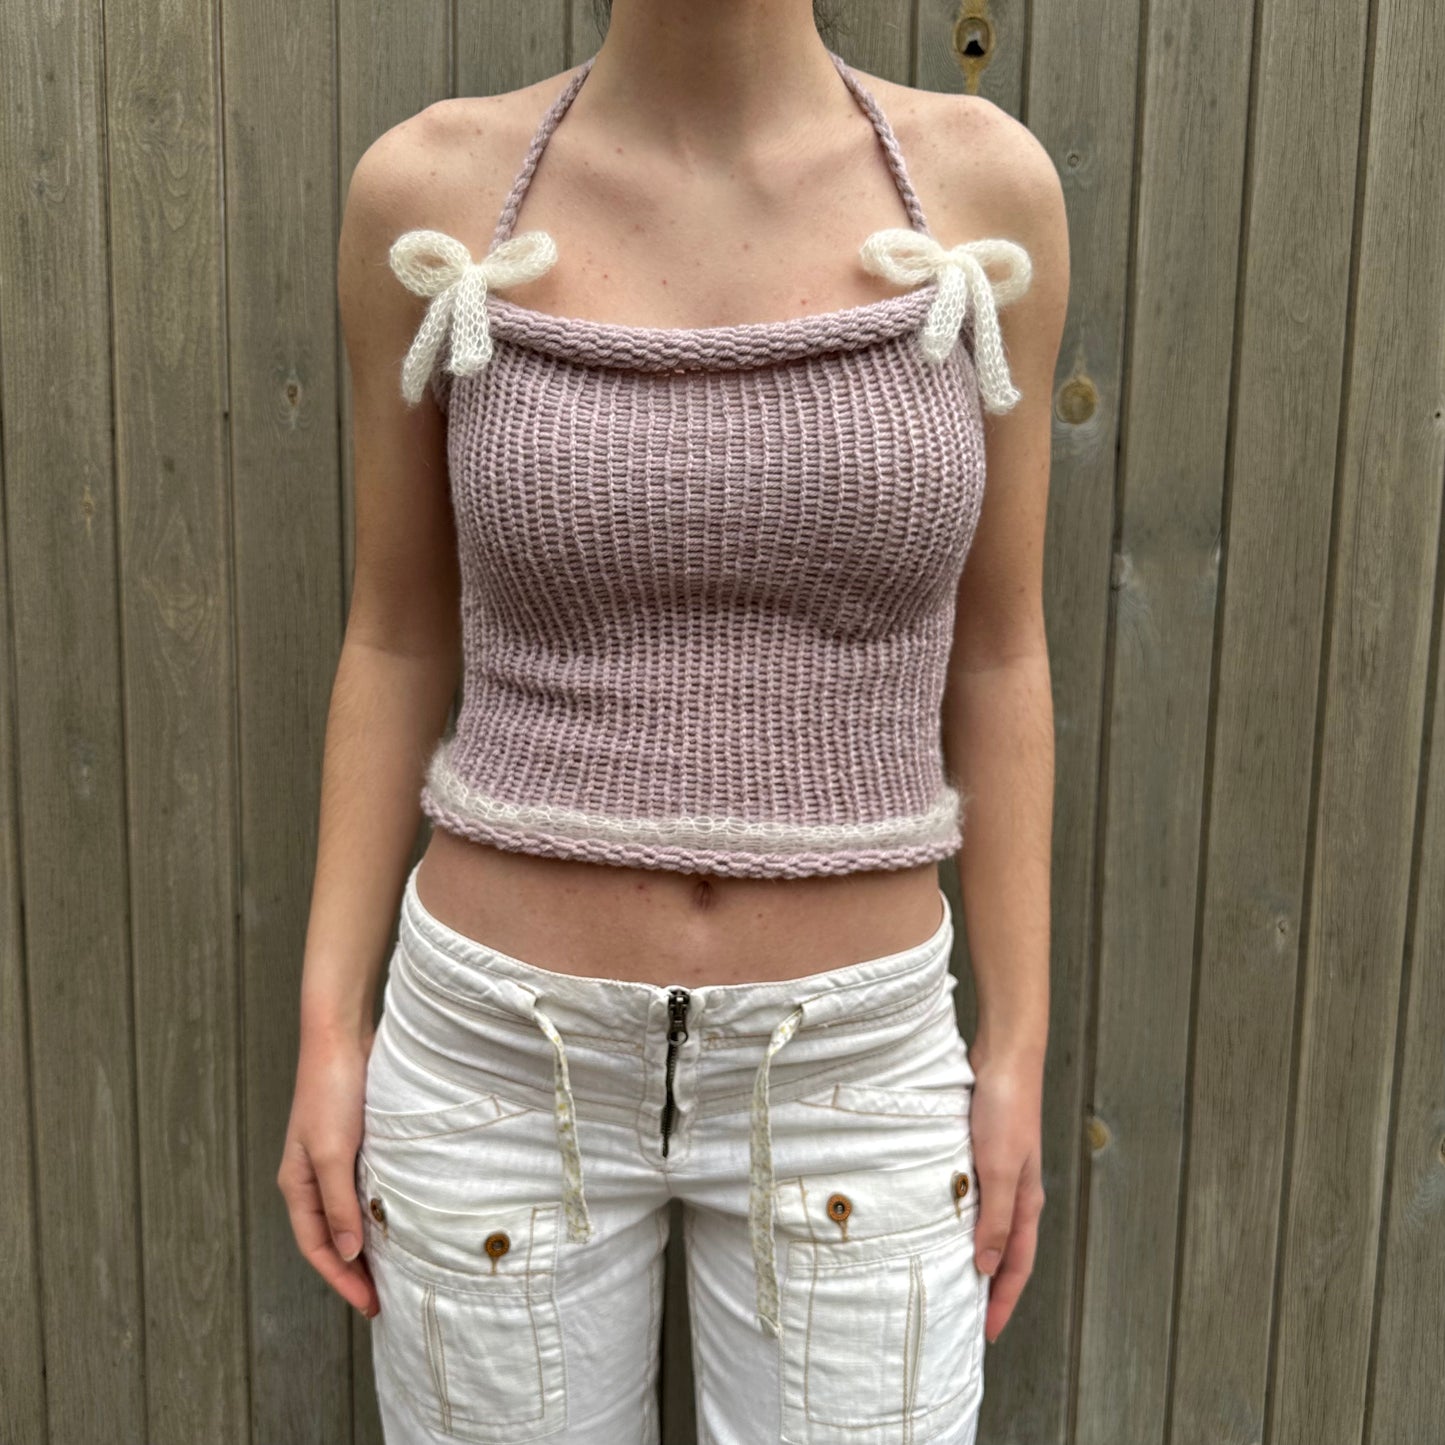 Handmade knitted mohair bow top in dusky pink and cream